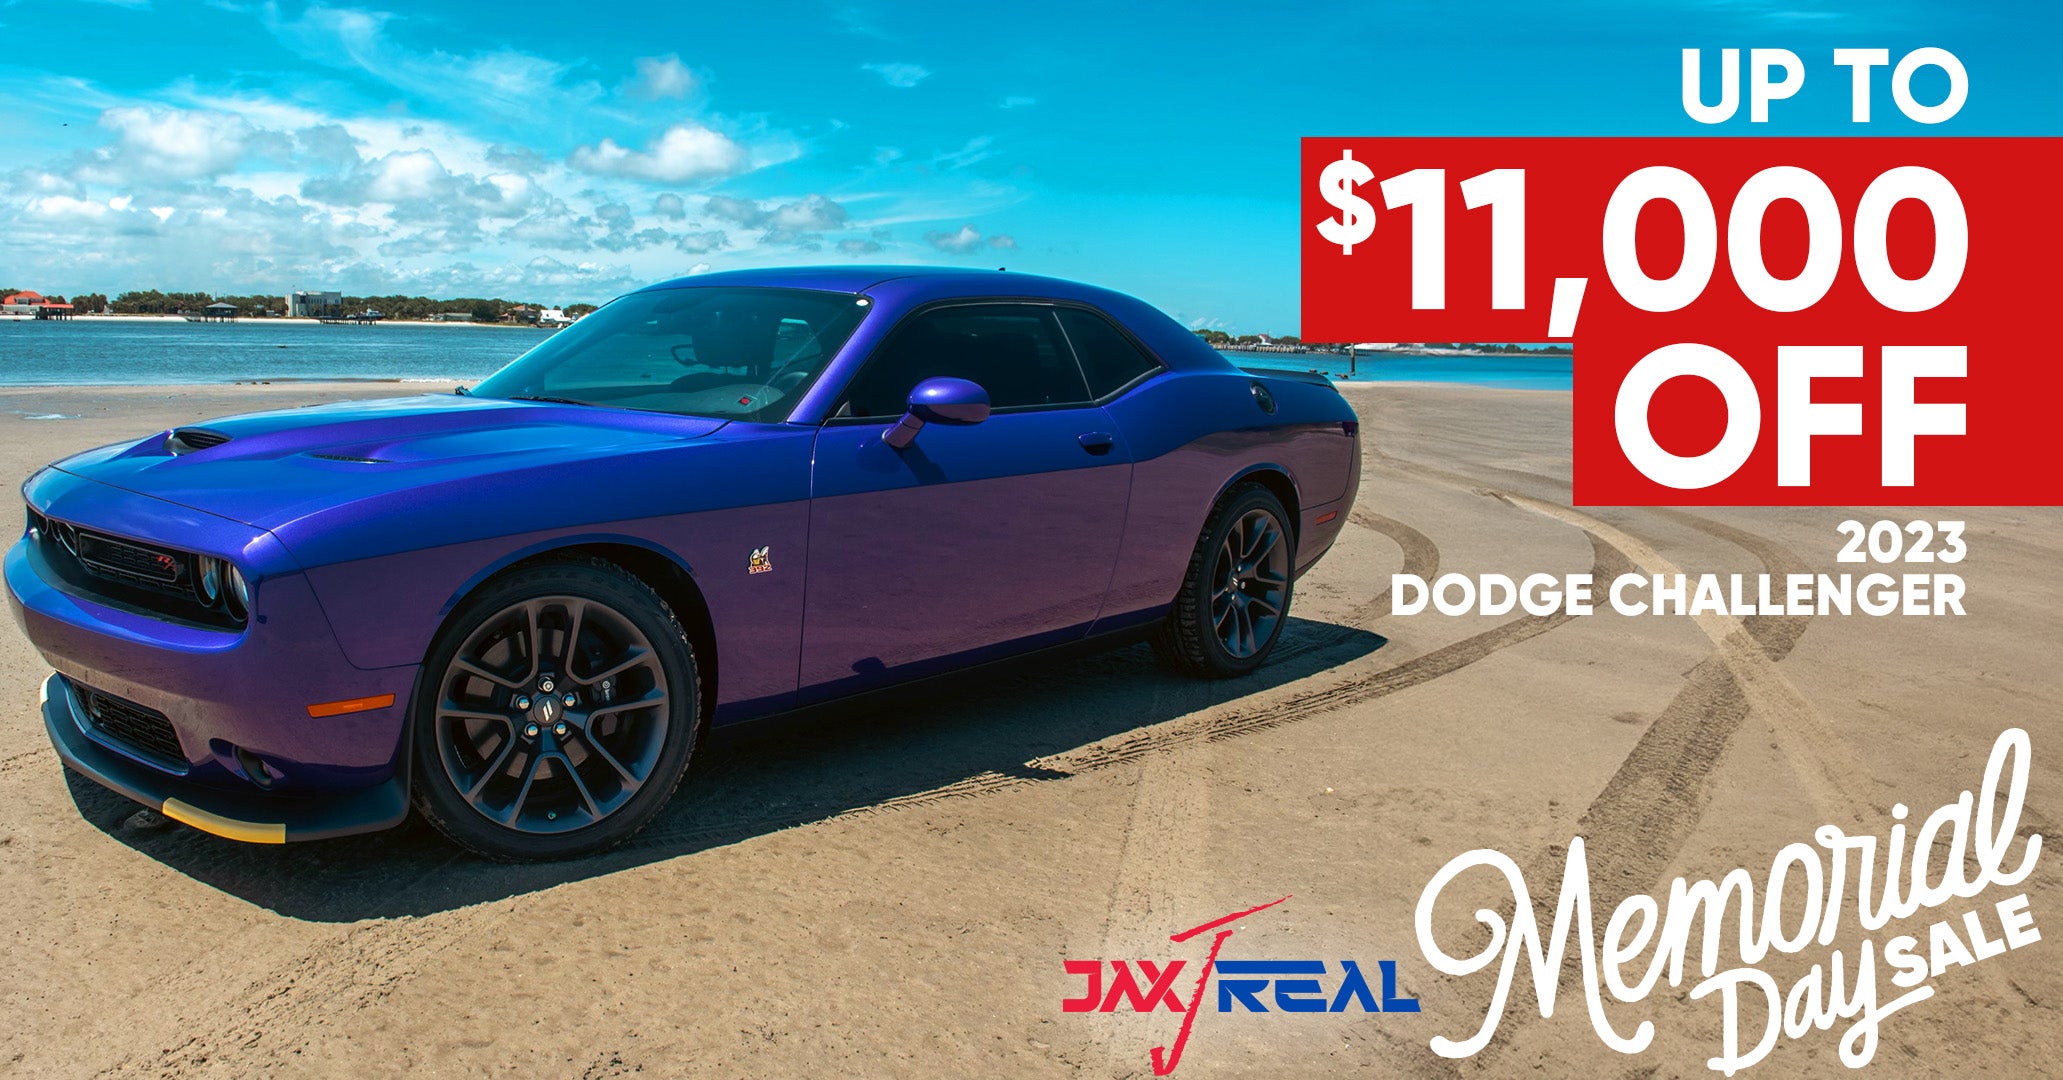 Up To $11,000 Off 2023 Dodge Challenger